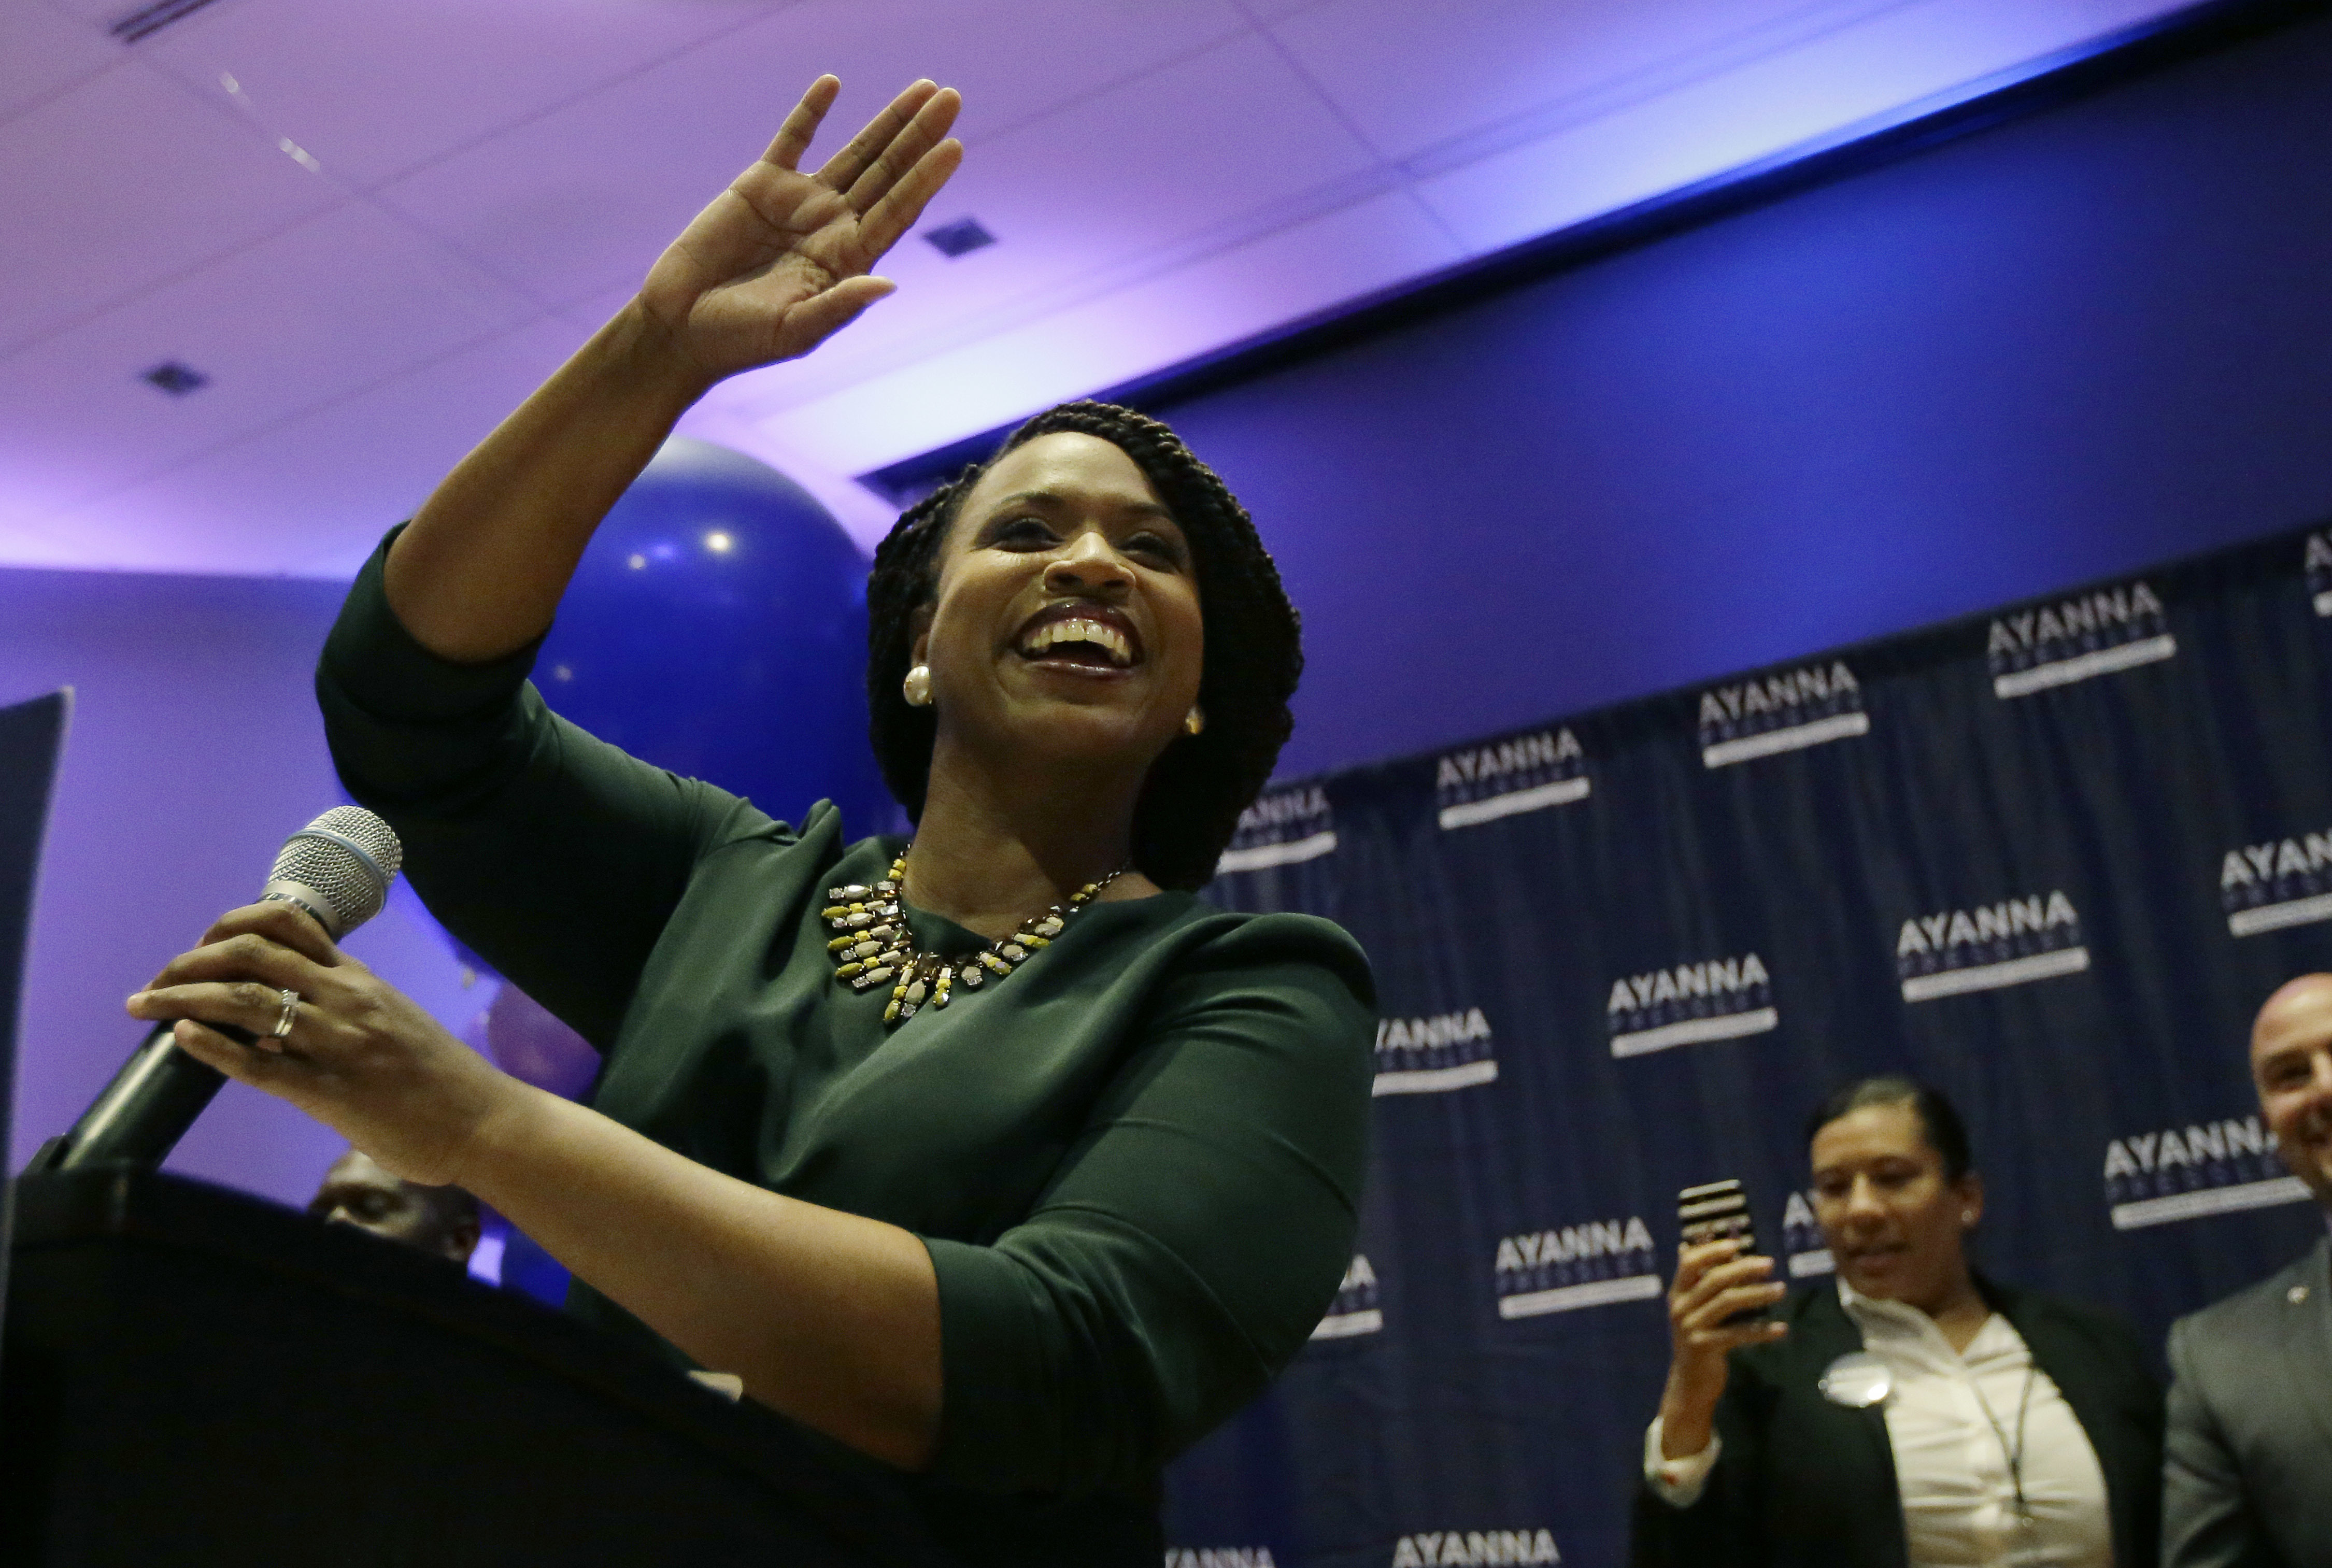 Ayanna Pressley celebrates her victory in the Congressional House Democratic primary in Boston, Mass. on Sept. 4, 2018. (Steven Senne—AP)